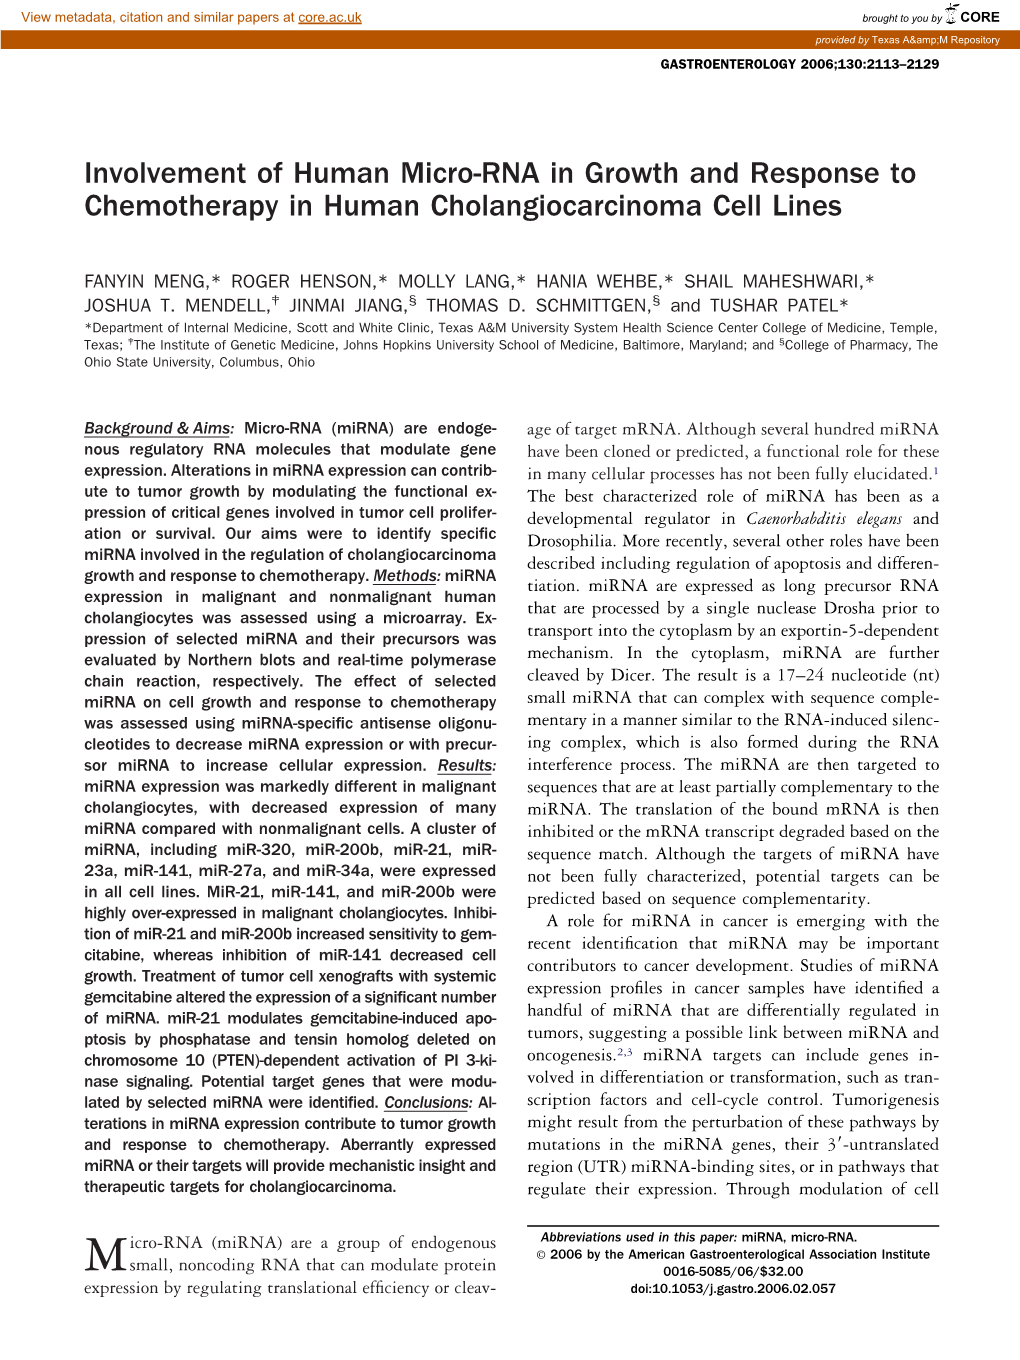 Involvement of Human Micro-RNA in Growth and Response to Chemotherapy in Human Cholangiocarcinoma Cell Lines